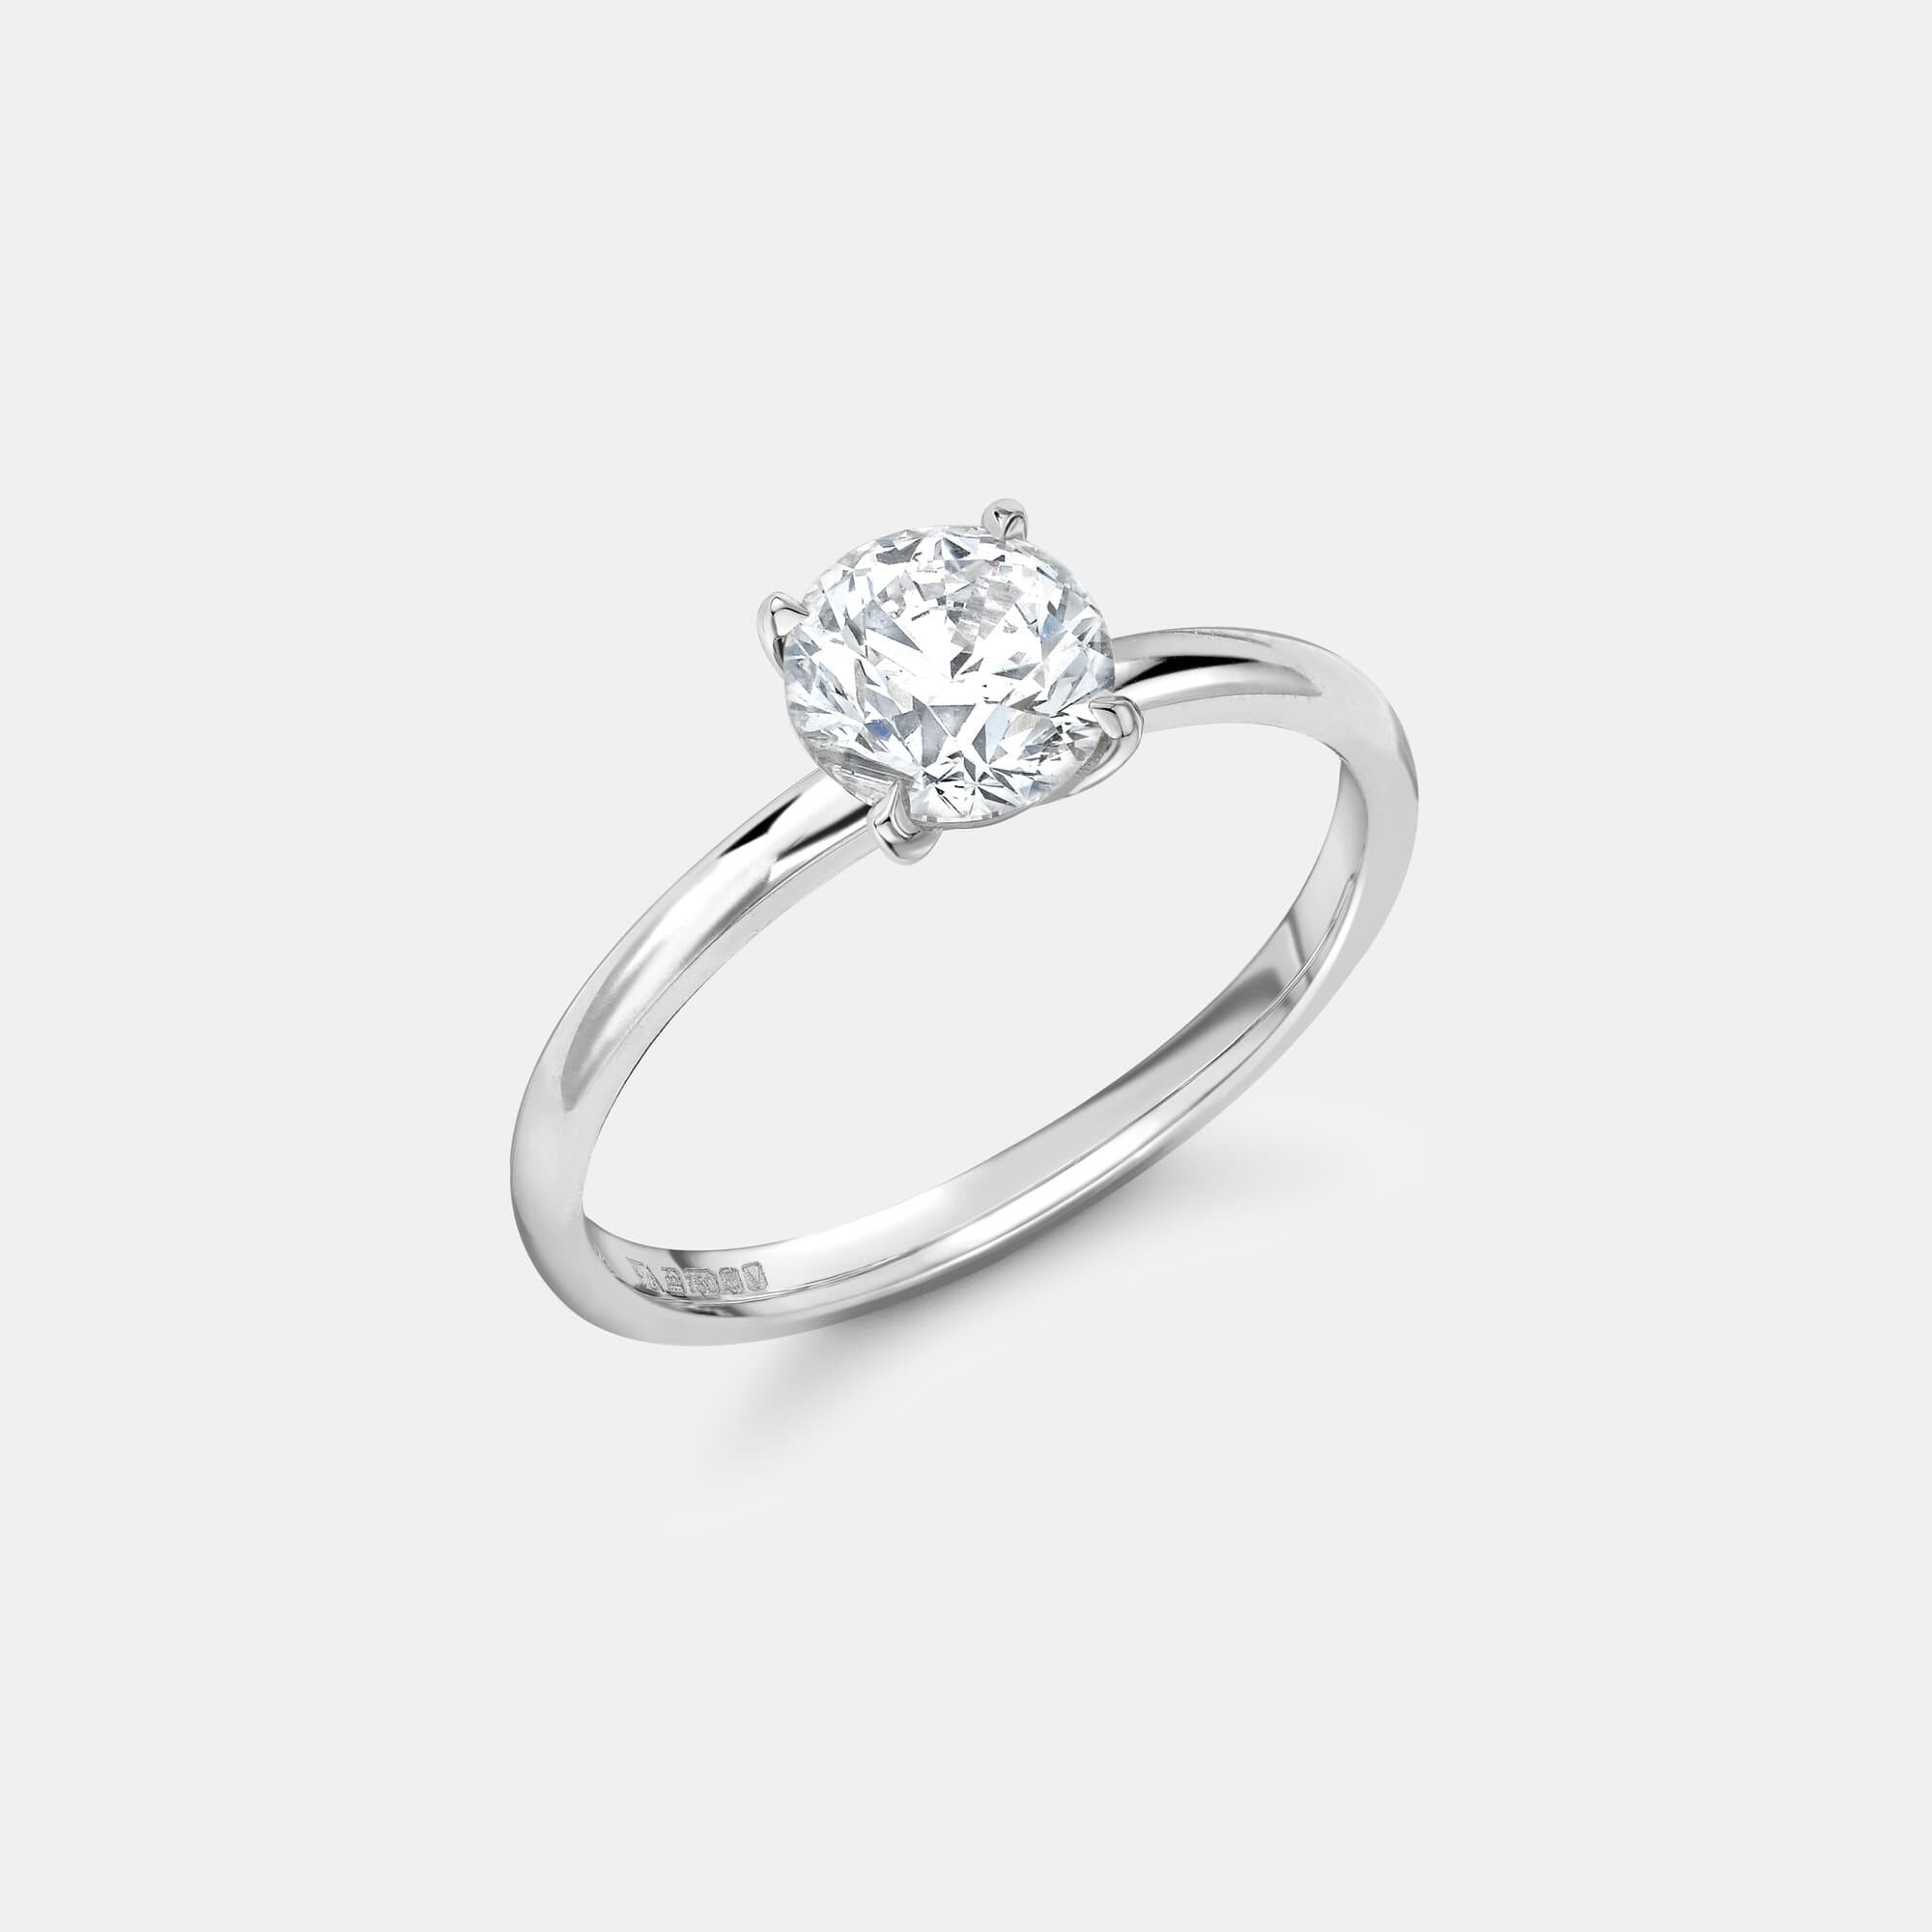 Venetia | Six Claw Engagement Ring with Channel Set Band